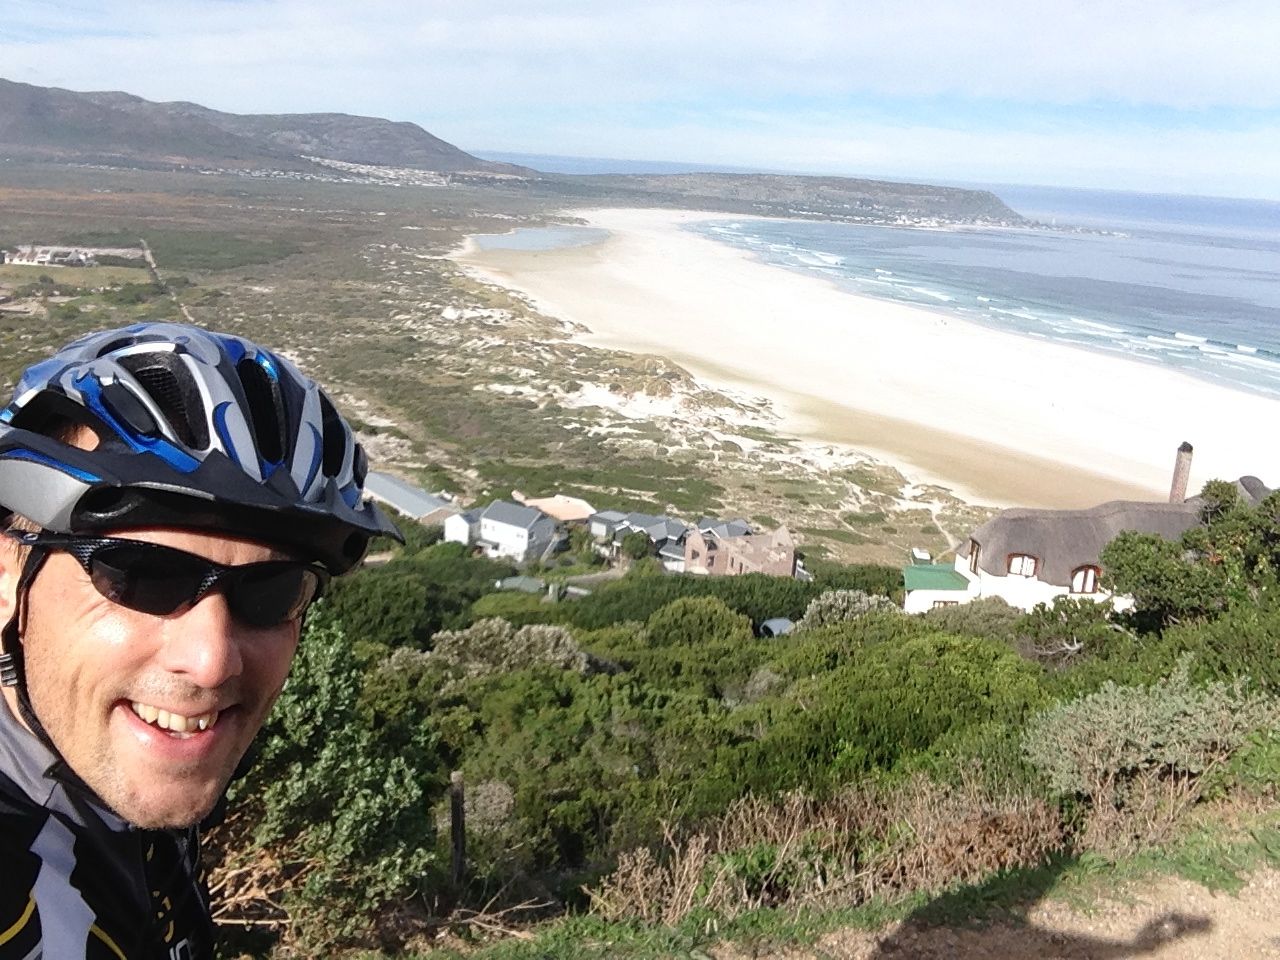 Bike Session 4/2014 – Riding parts of Two Oceans Route – 60 km – 03.05.2014